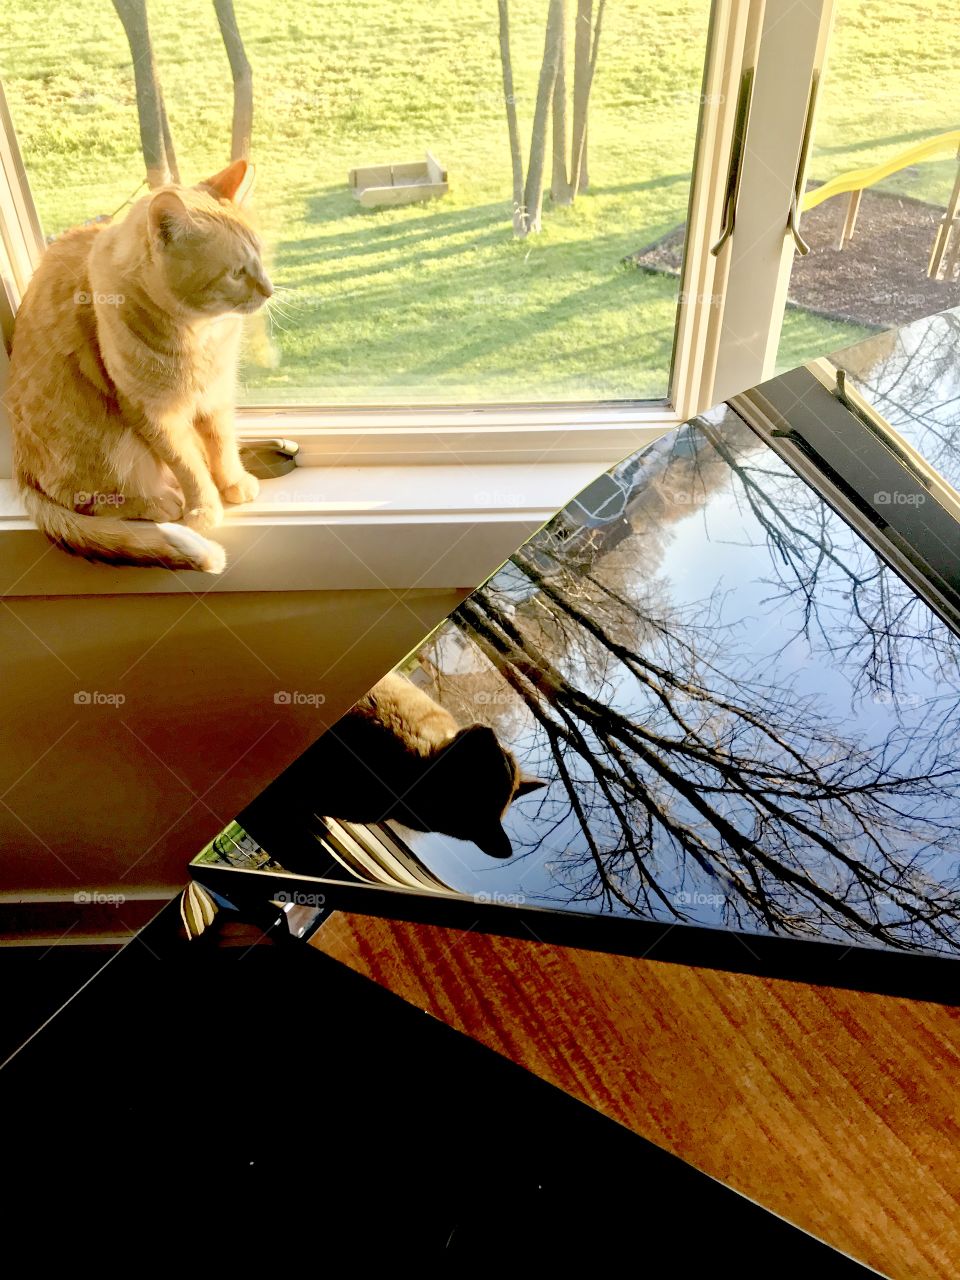 Darling curious tabby cat enjoying sitting in window with beautiful reflection being captured in baby grand! 